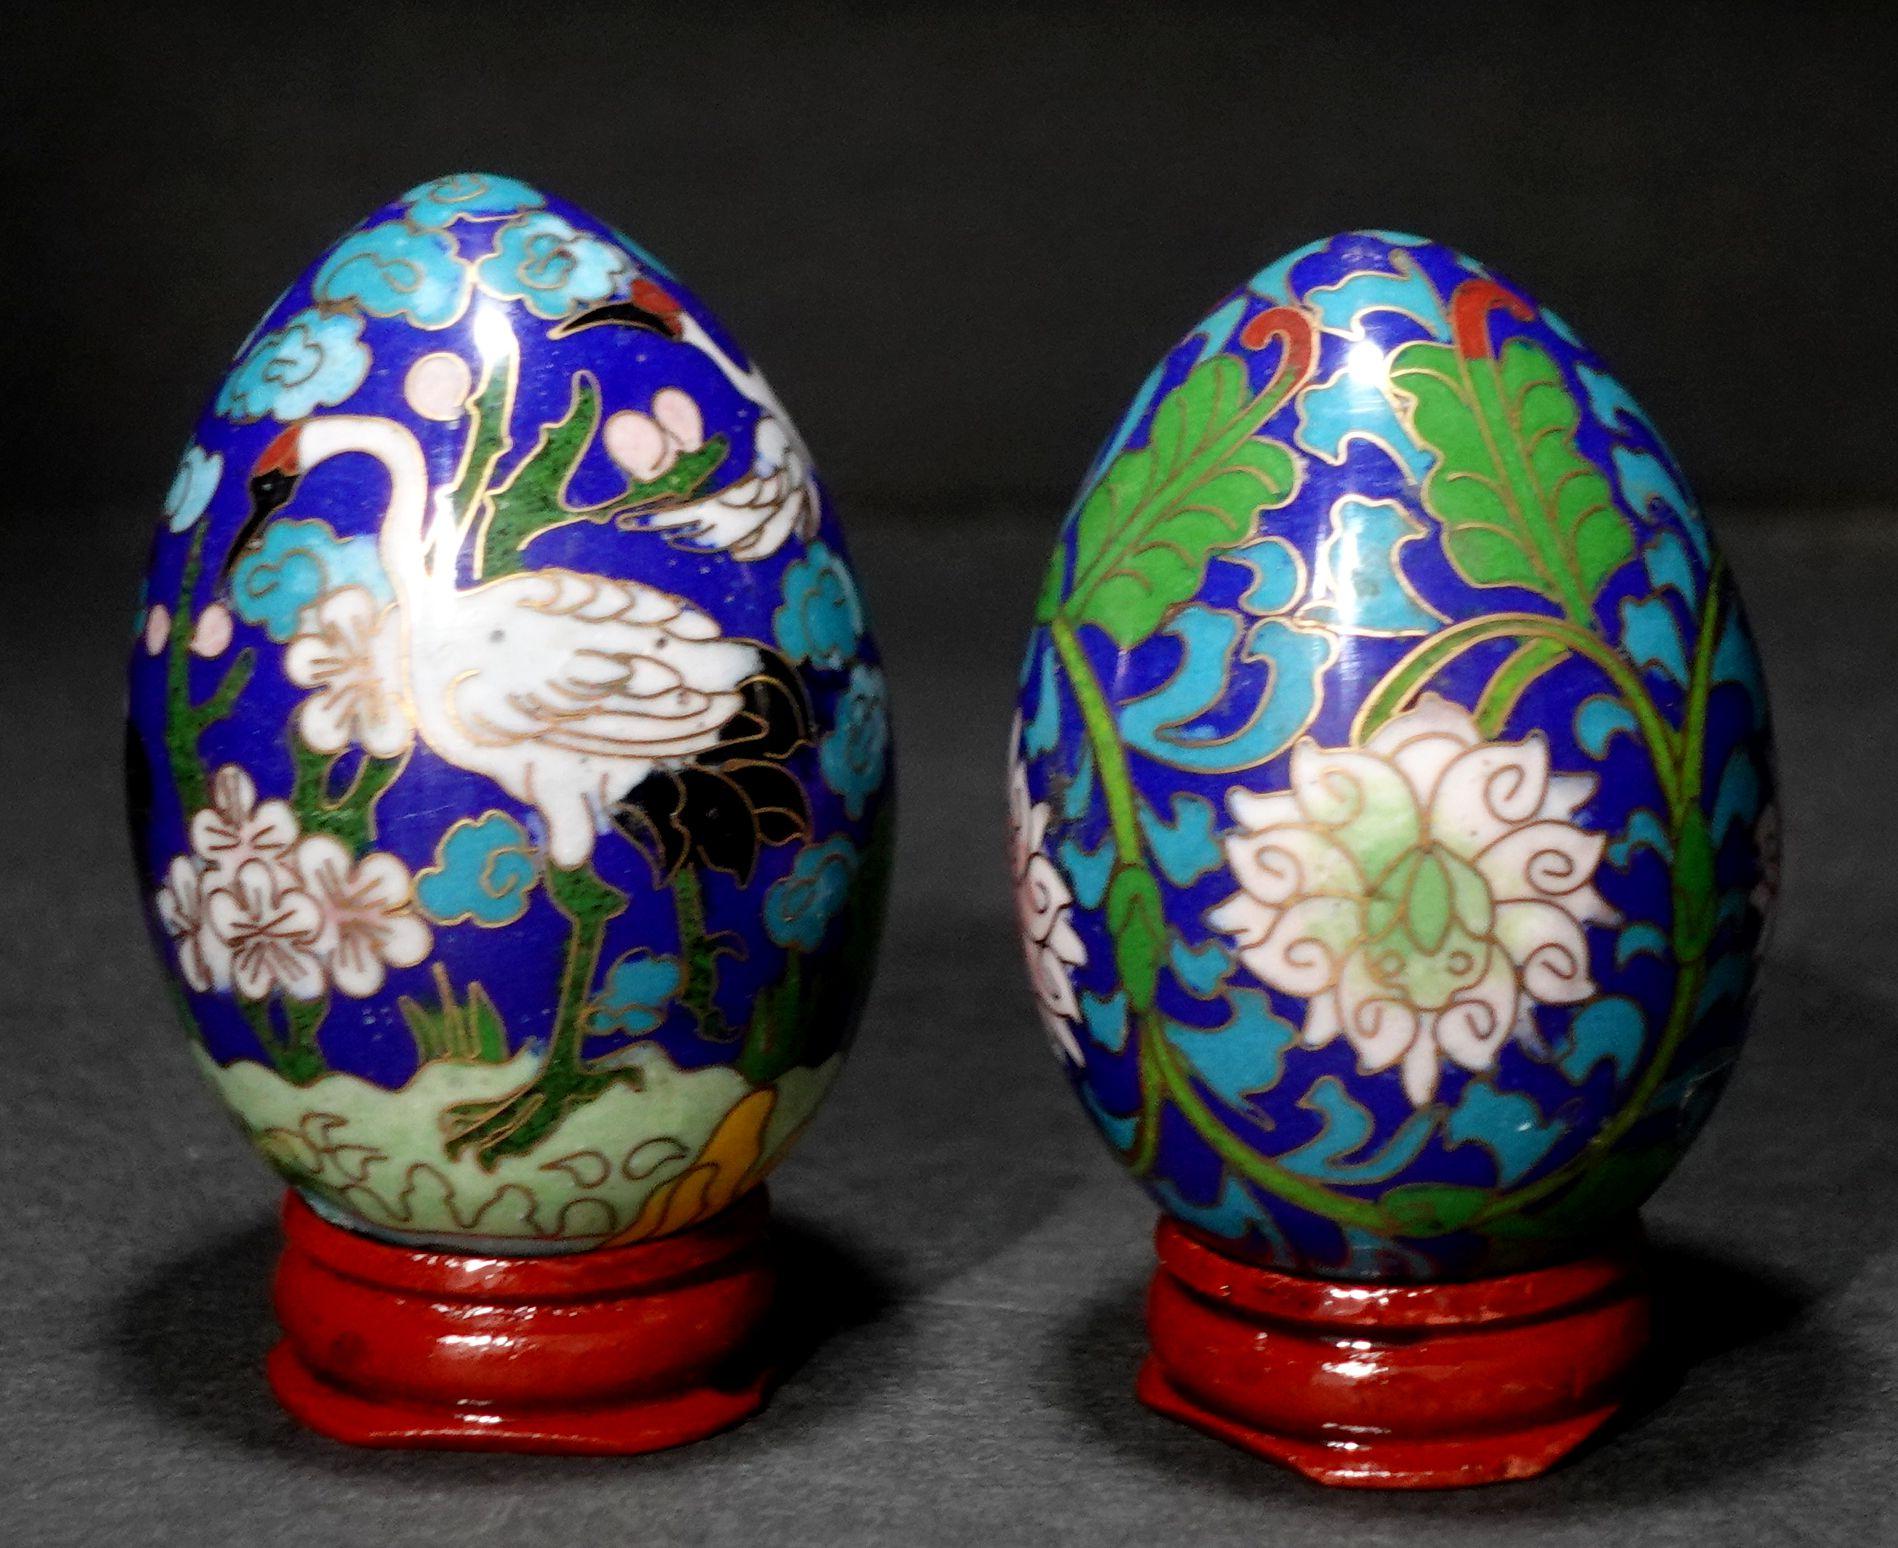 Presenting a beautiful Chinese cloisonné enamel egg depicting flowers and birds with wood stands, early 20 century.